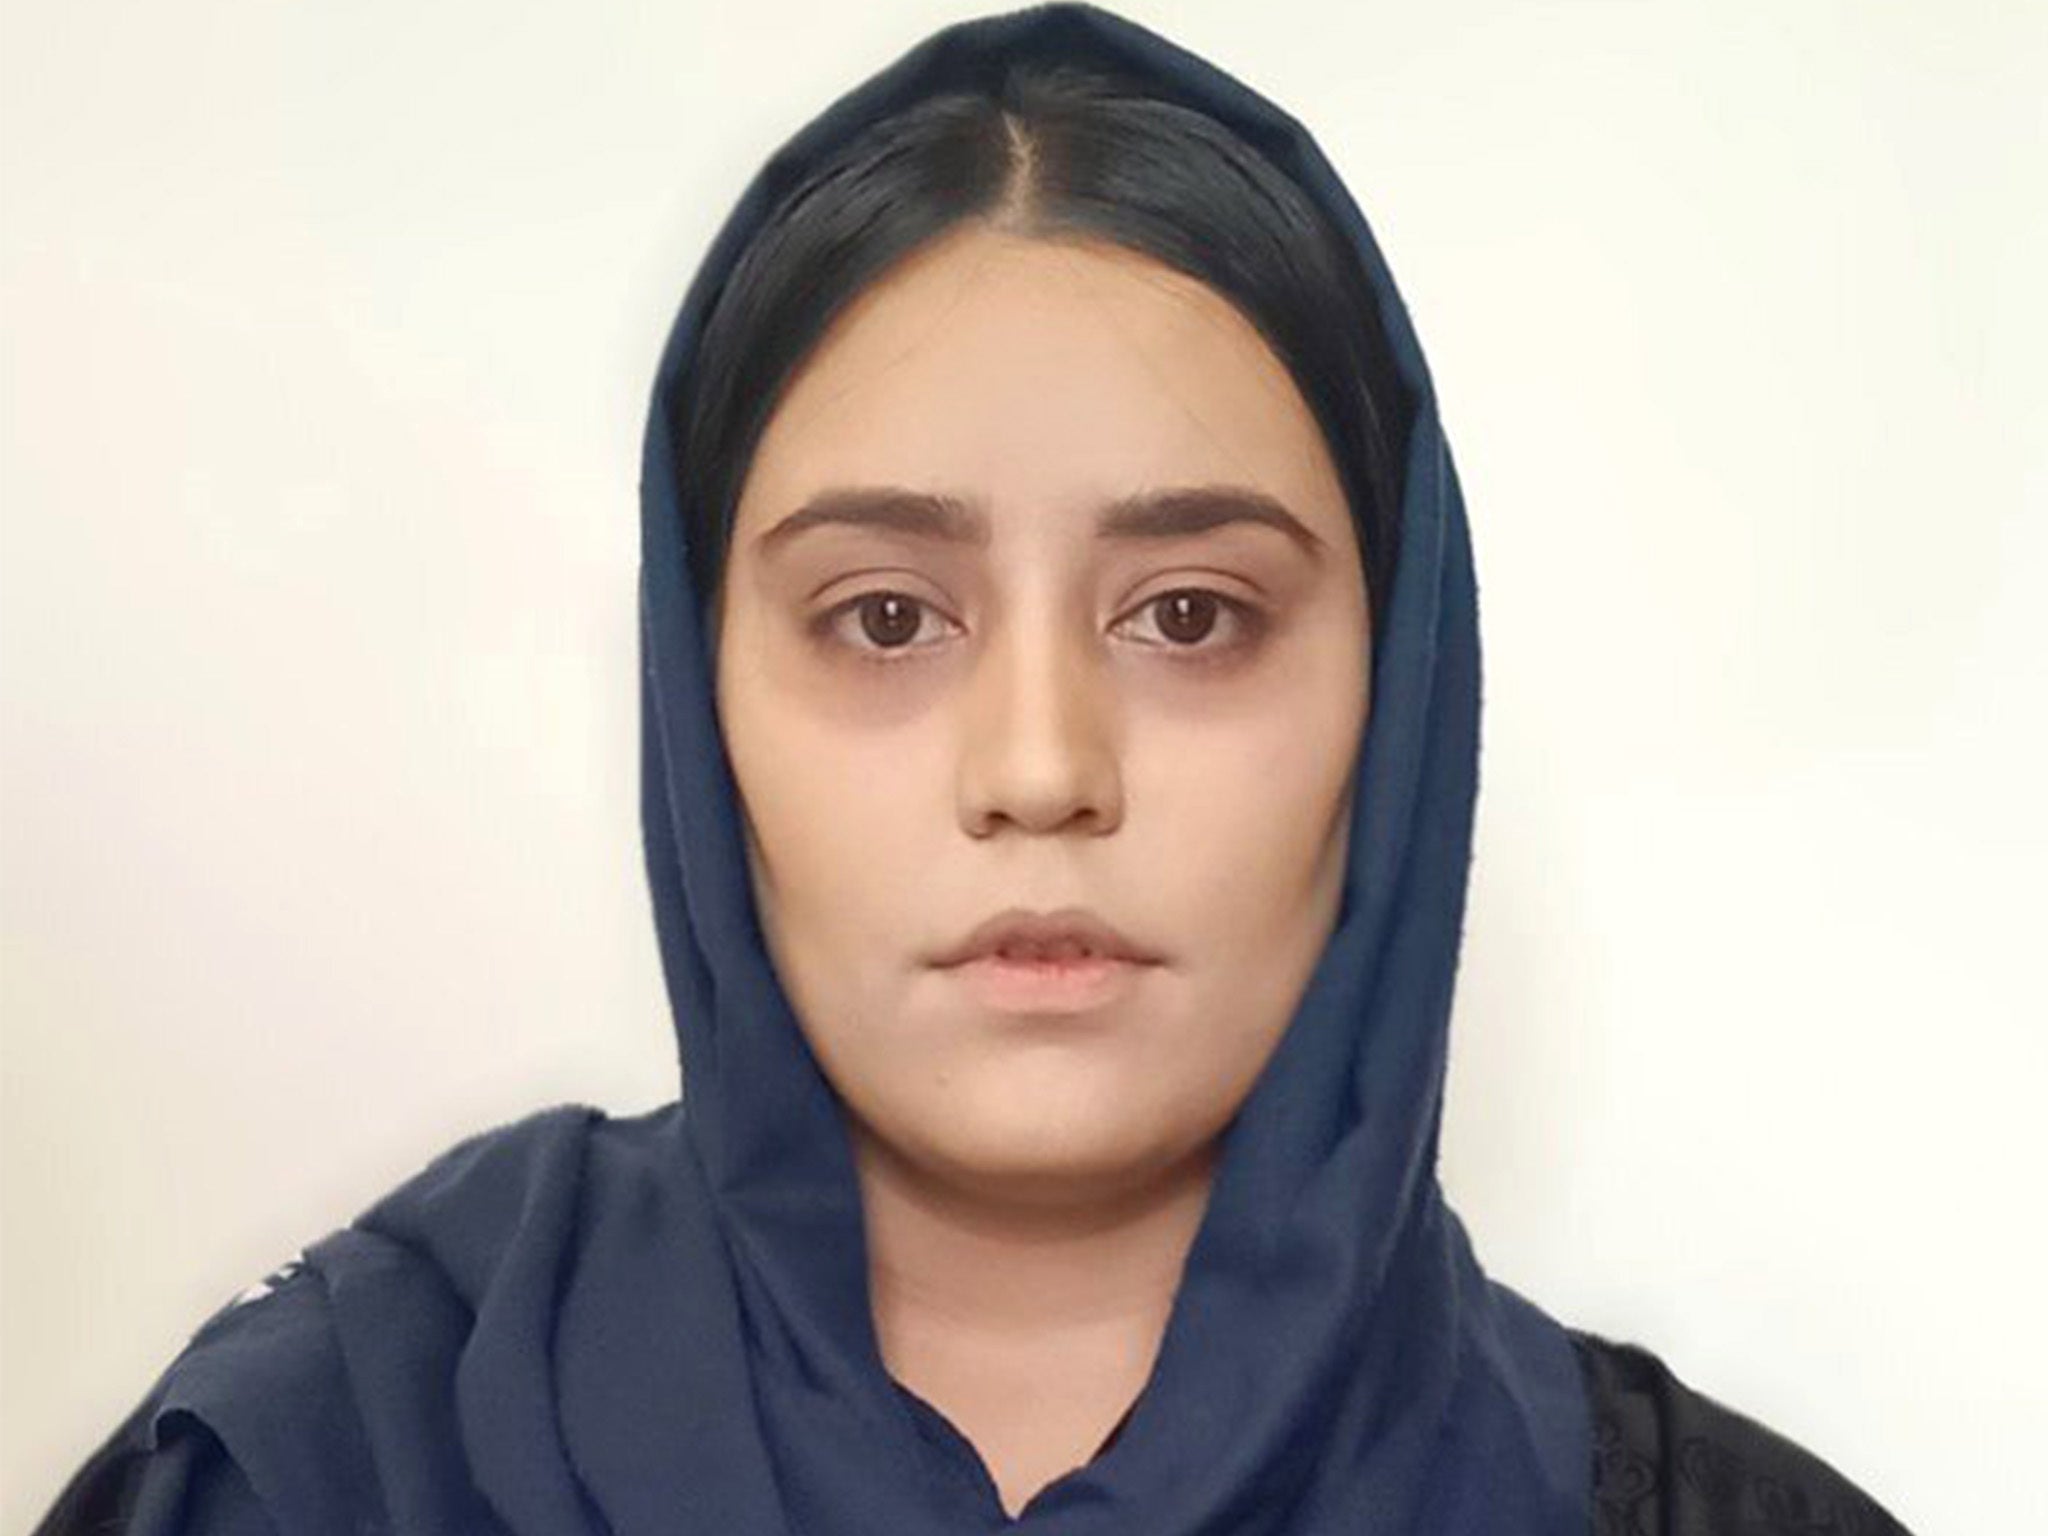 Elaha Delawarzai was held in detention at the Taliban’s intelligence cell in Kabul for 156 days